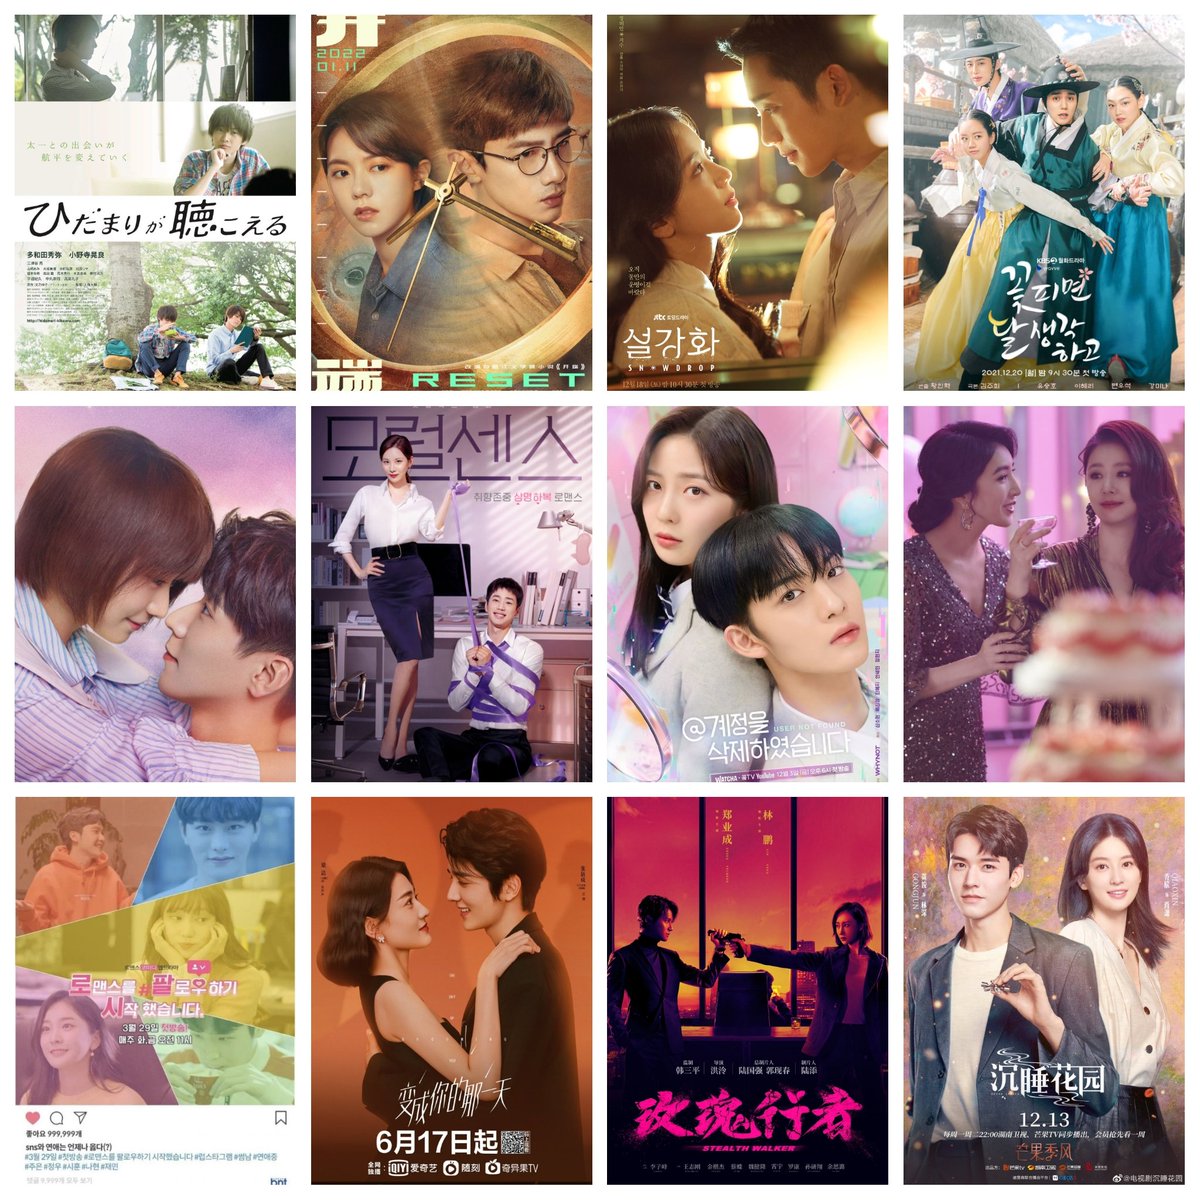 Feb 2022 Wrap-Up 
#Reset 9/10
#StealthWalker 8.5/10
#TheDayofBecomingYou 8.5/10
#Moonshine 8/10
#LightTheNight (1&2) 8/10
#DreamGarden 8/10
#LoveAndLeashes 8/10
#SilhouetteOfYourVoice 8/10
#IStartedFollowingRomance 7.5/10
#UserNotFound 7/10
#Snowdrop 6.5/10
#FightingGirl 6.5/10